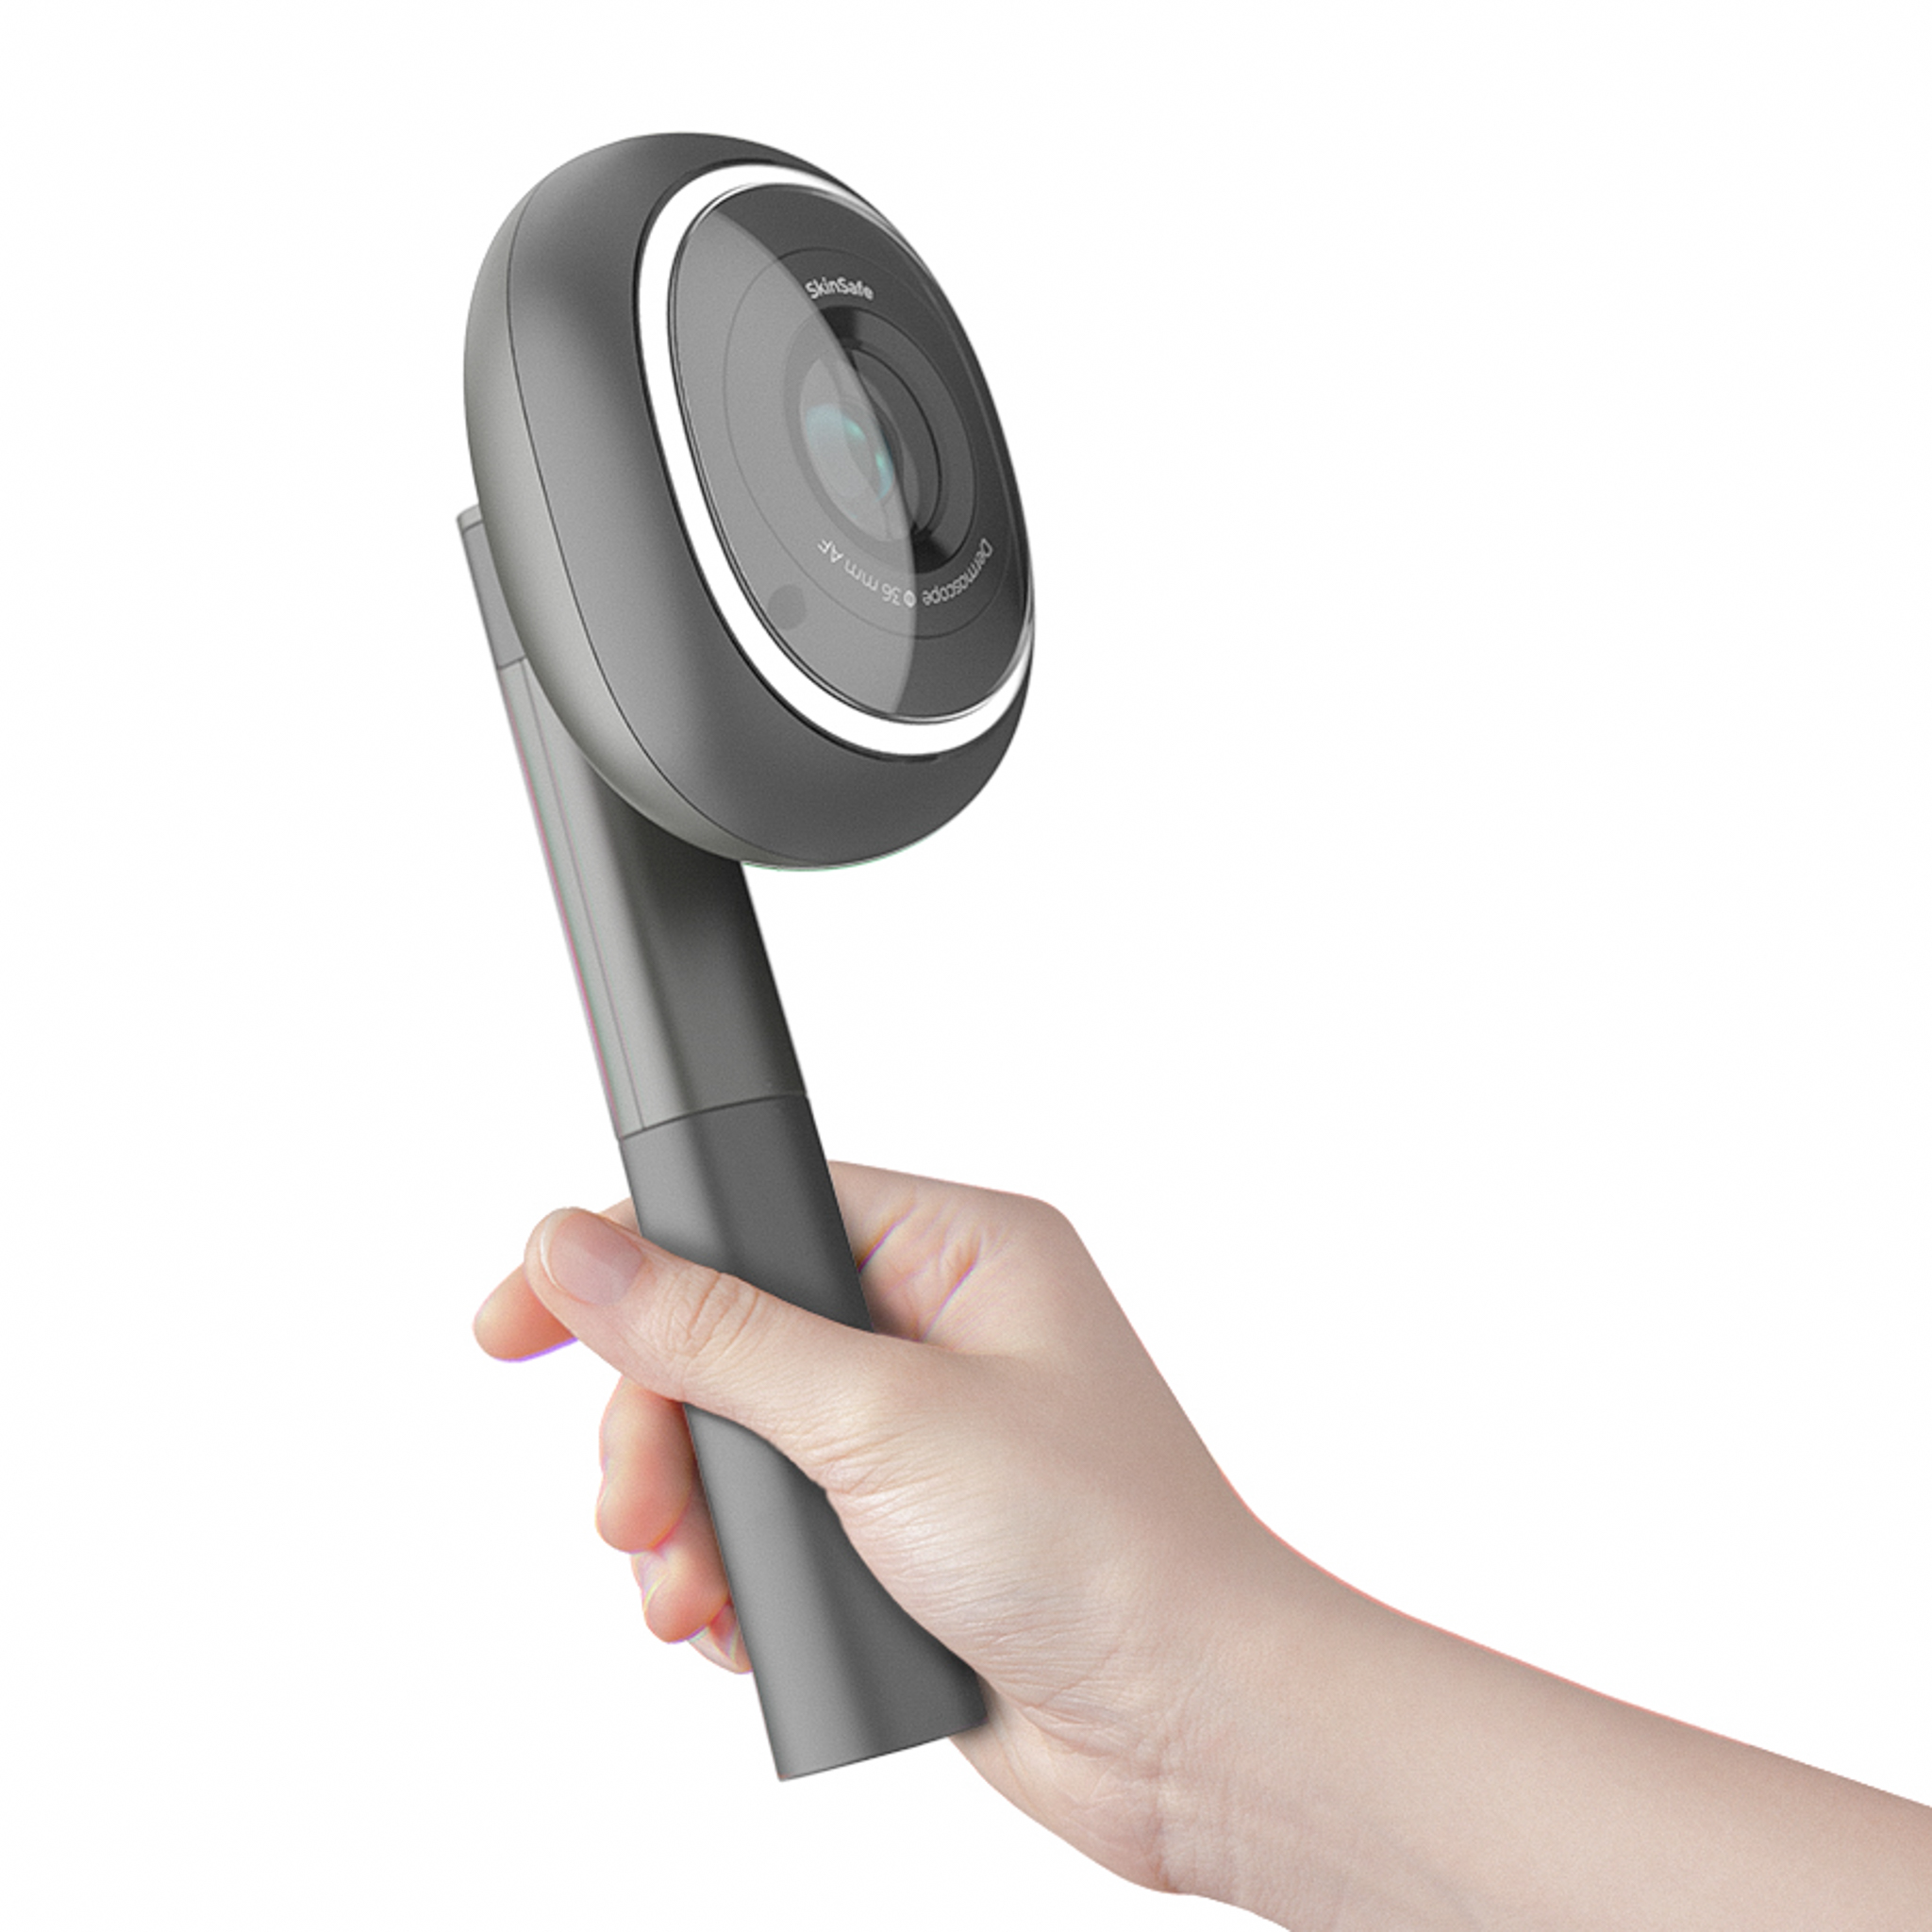 3D render of the SkinSafe medical device handle shown being handled by a person